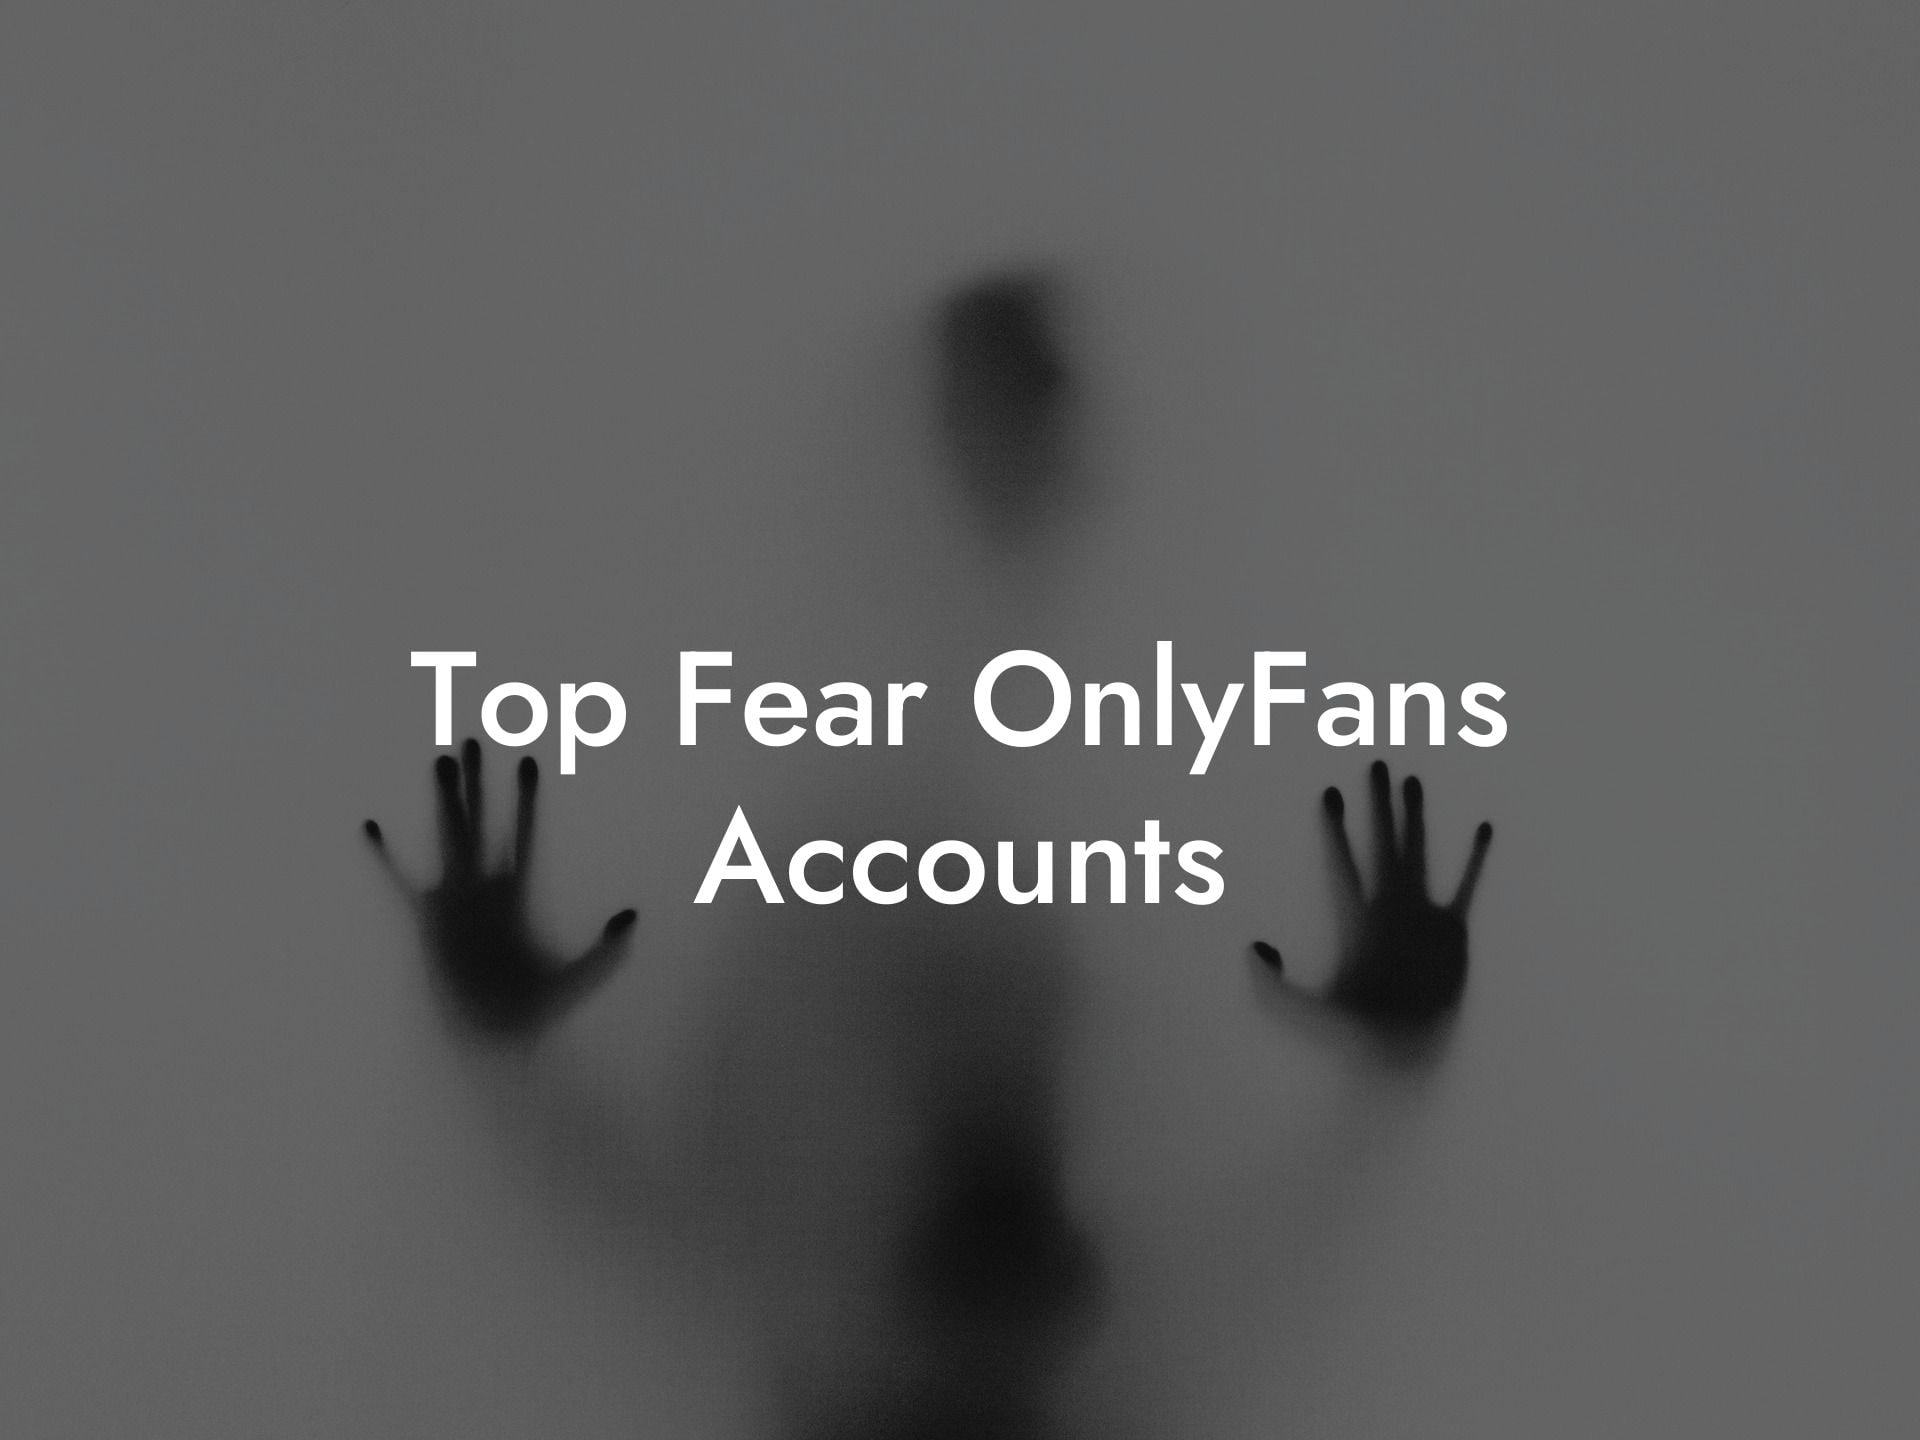 Top Fear OnlyFans Accounts